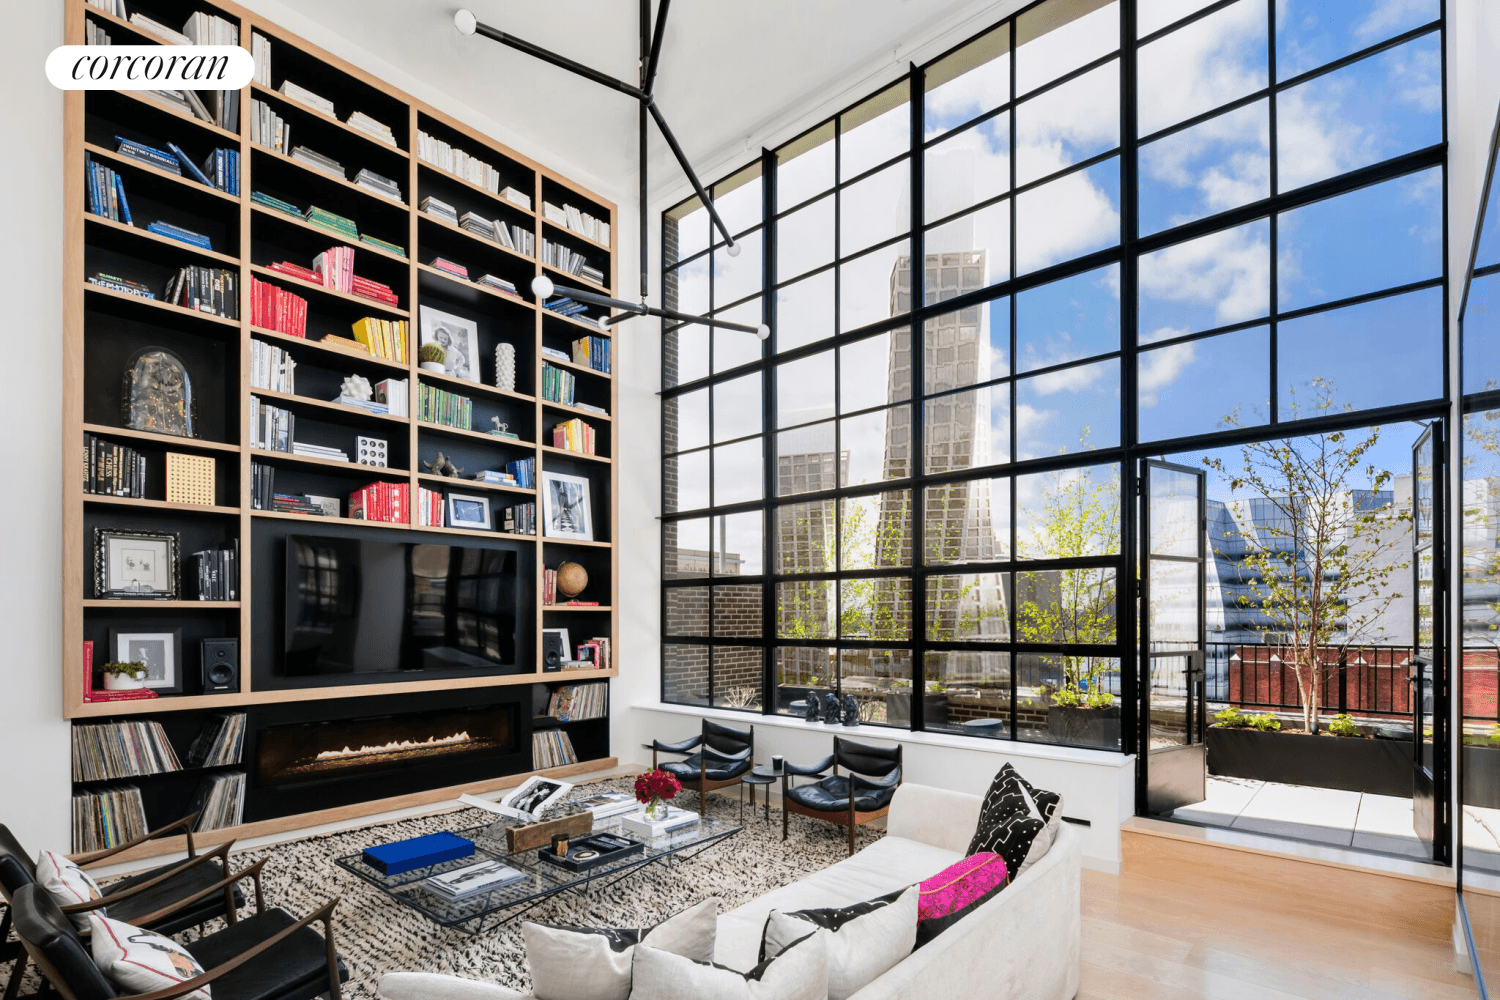 Penthouse 8 9H at 456 West 19th Street, where simplicity meets industrial elegance.